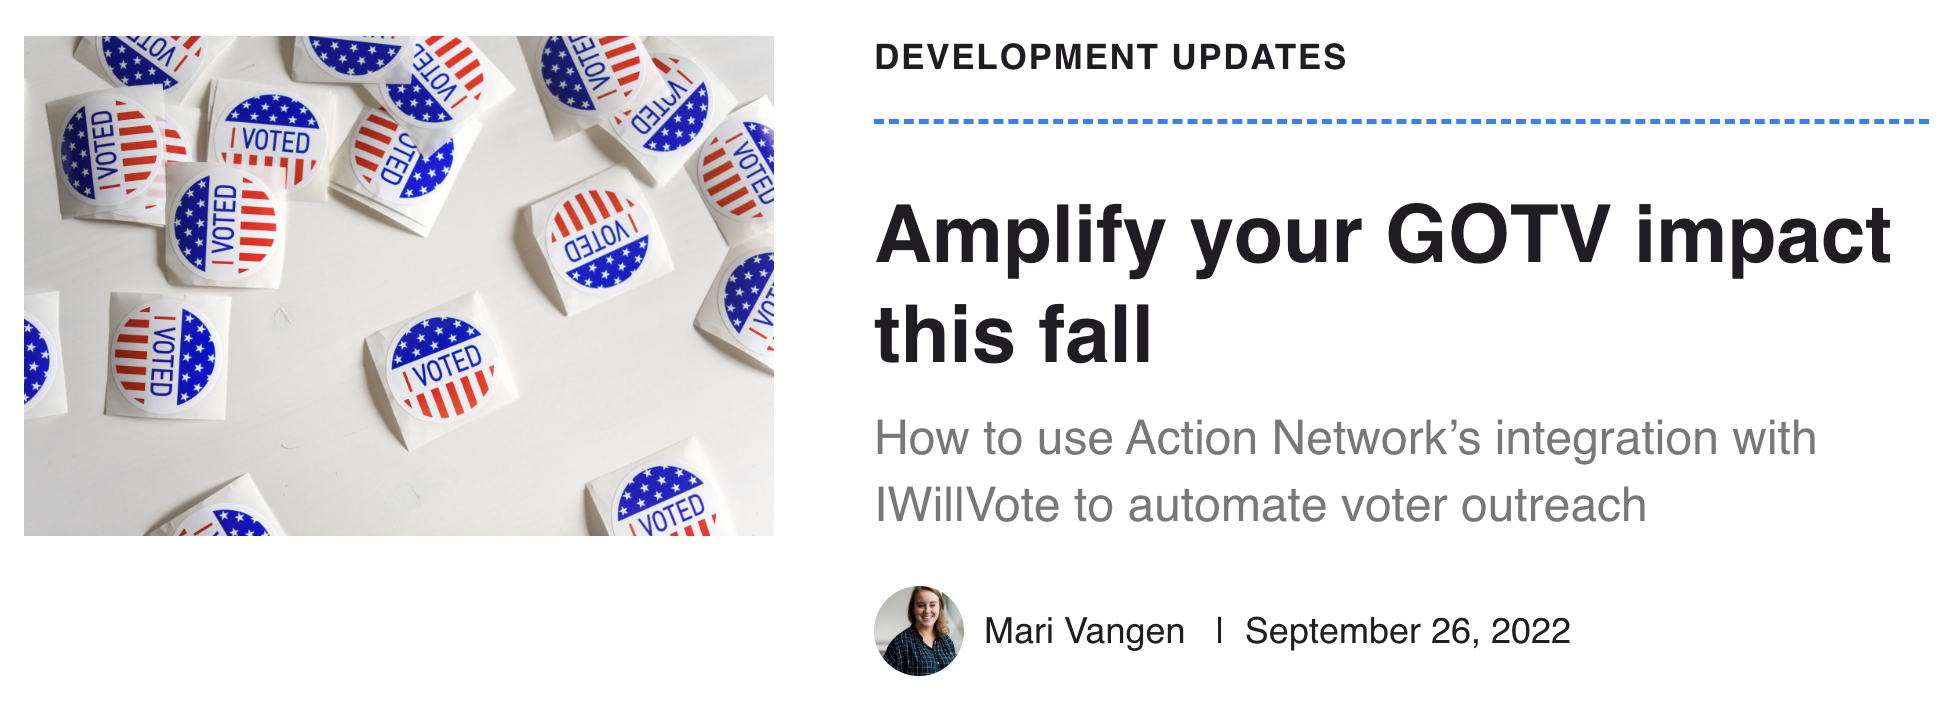 Screenshot of the title and image for the blog post, "Amplify your GOTV impact this fall"